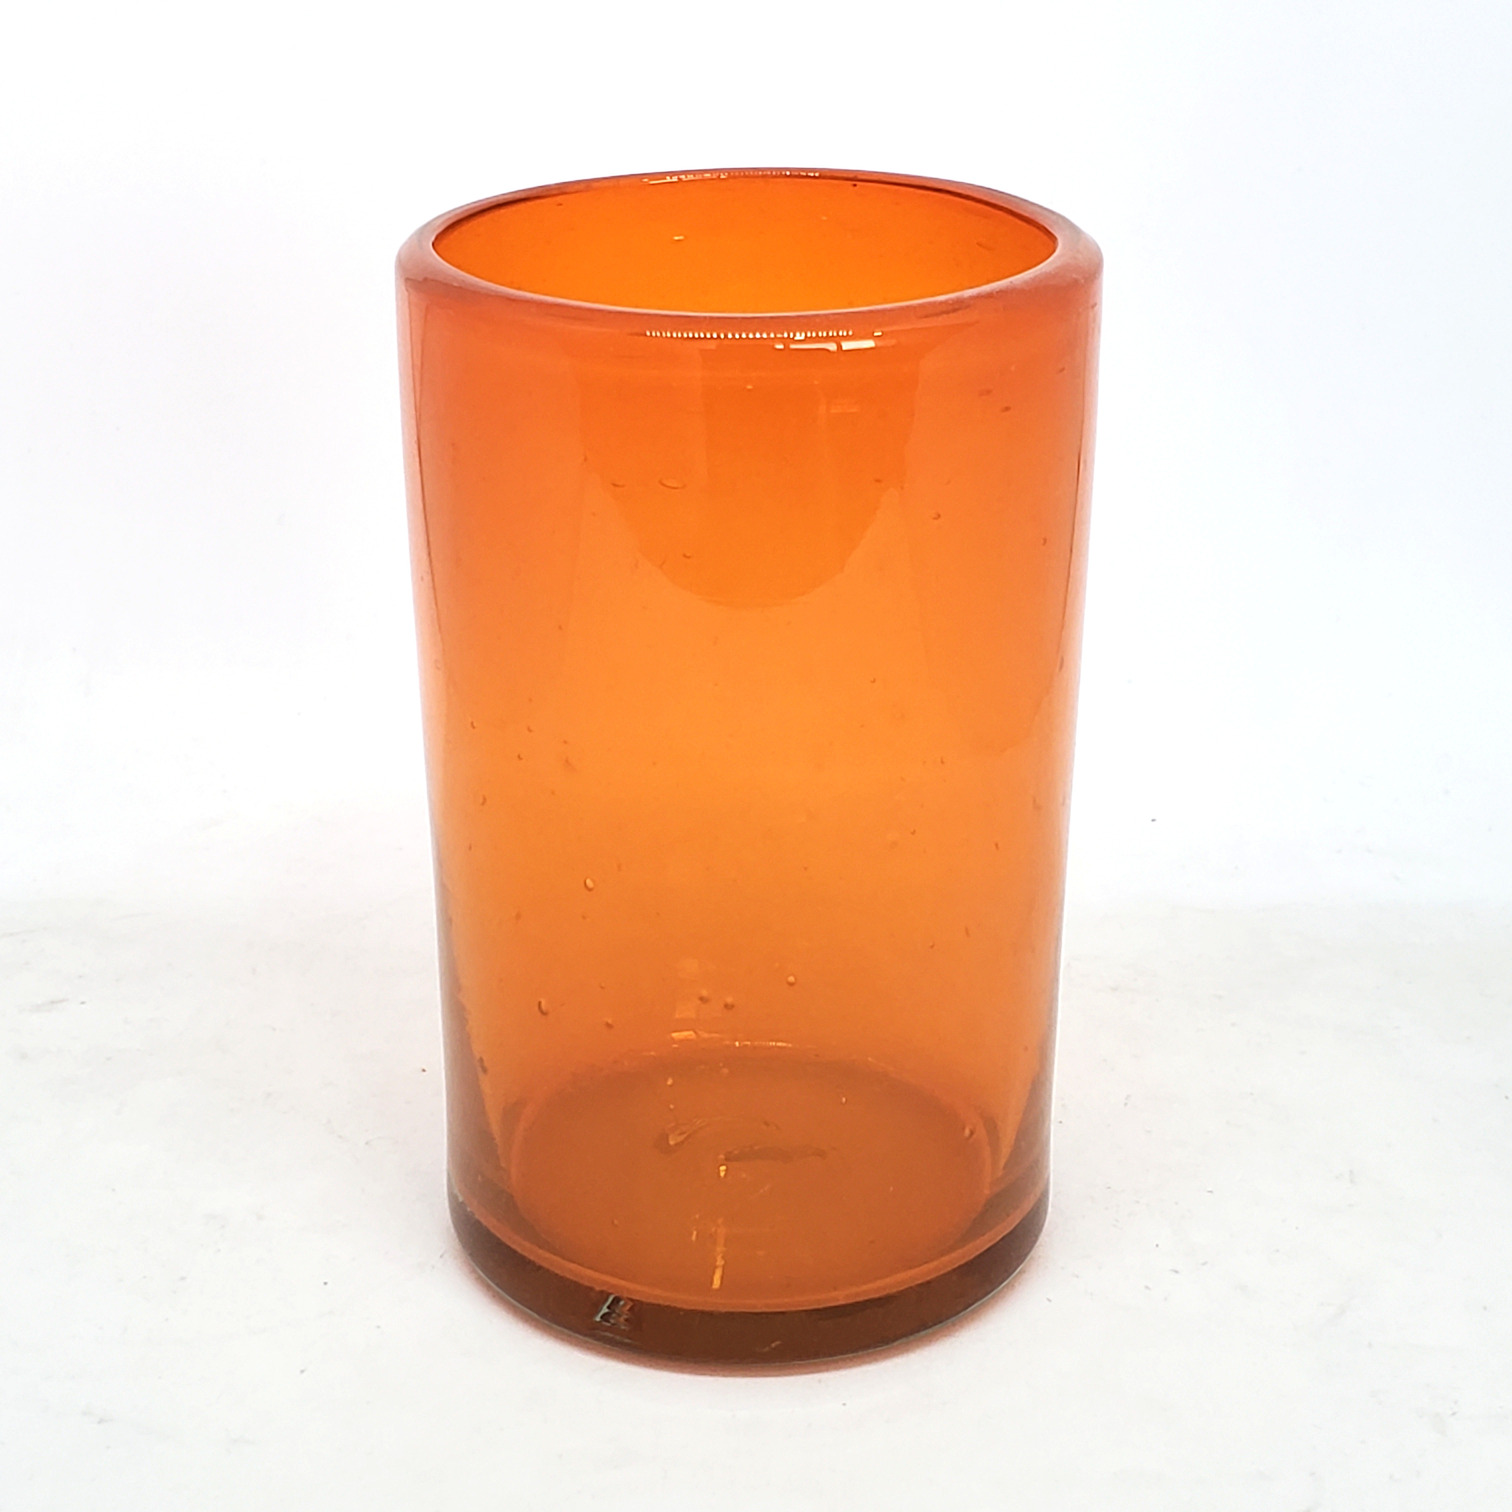 Wholesale Mexican Glasses / Solid Orange 14 oz Drinking Glasses  / These handcrafted glasses deliver a classic touch to your favorite drink.